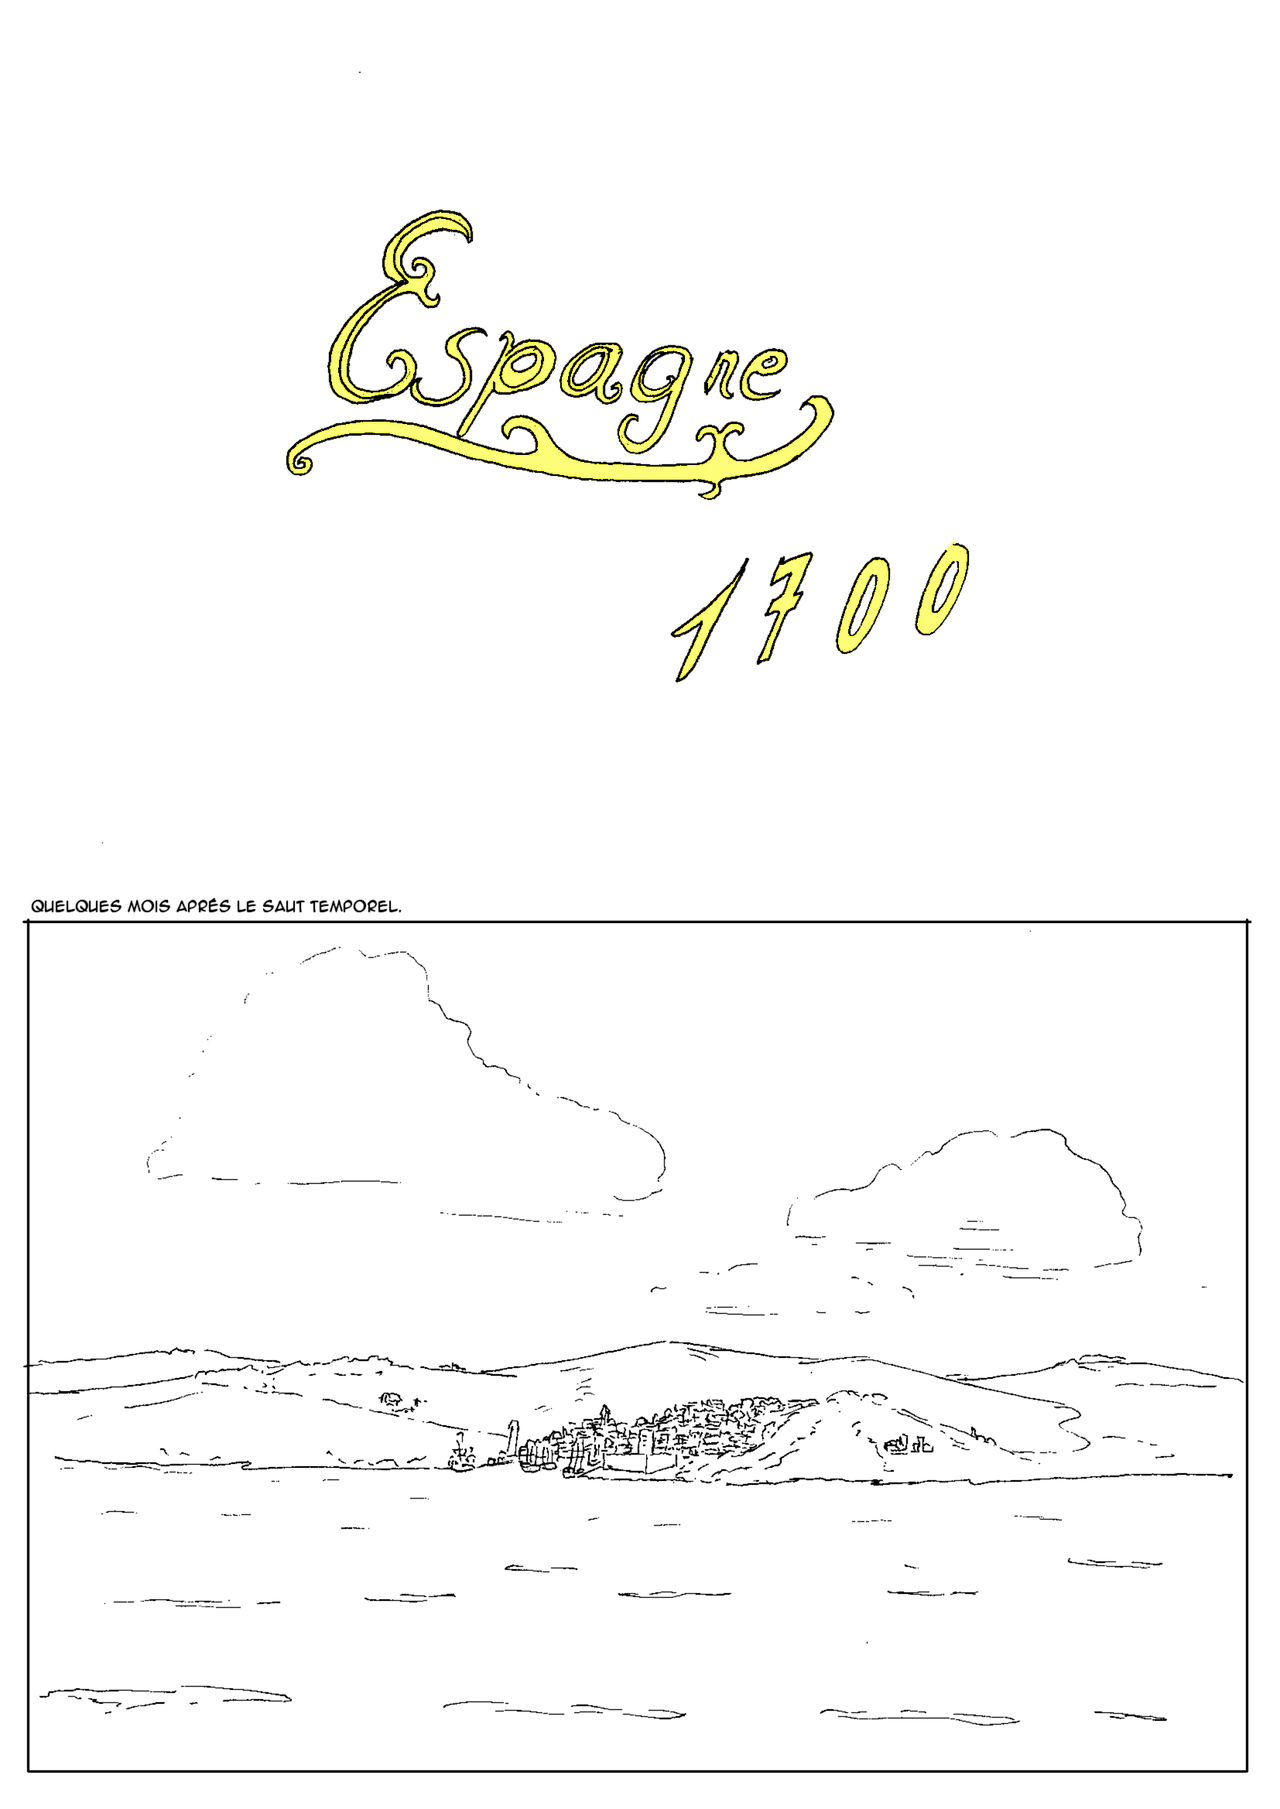 1700 part 3  french numero d'image 3